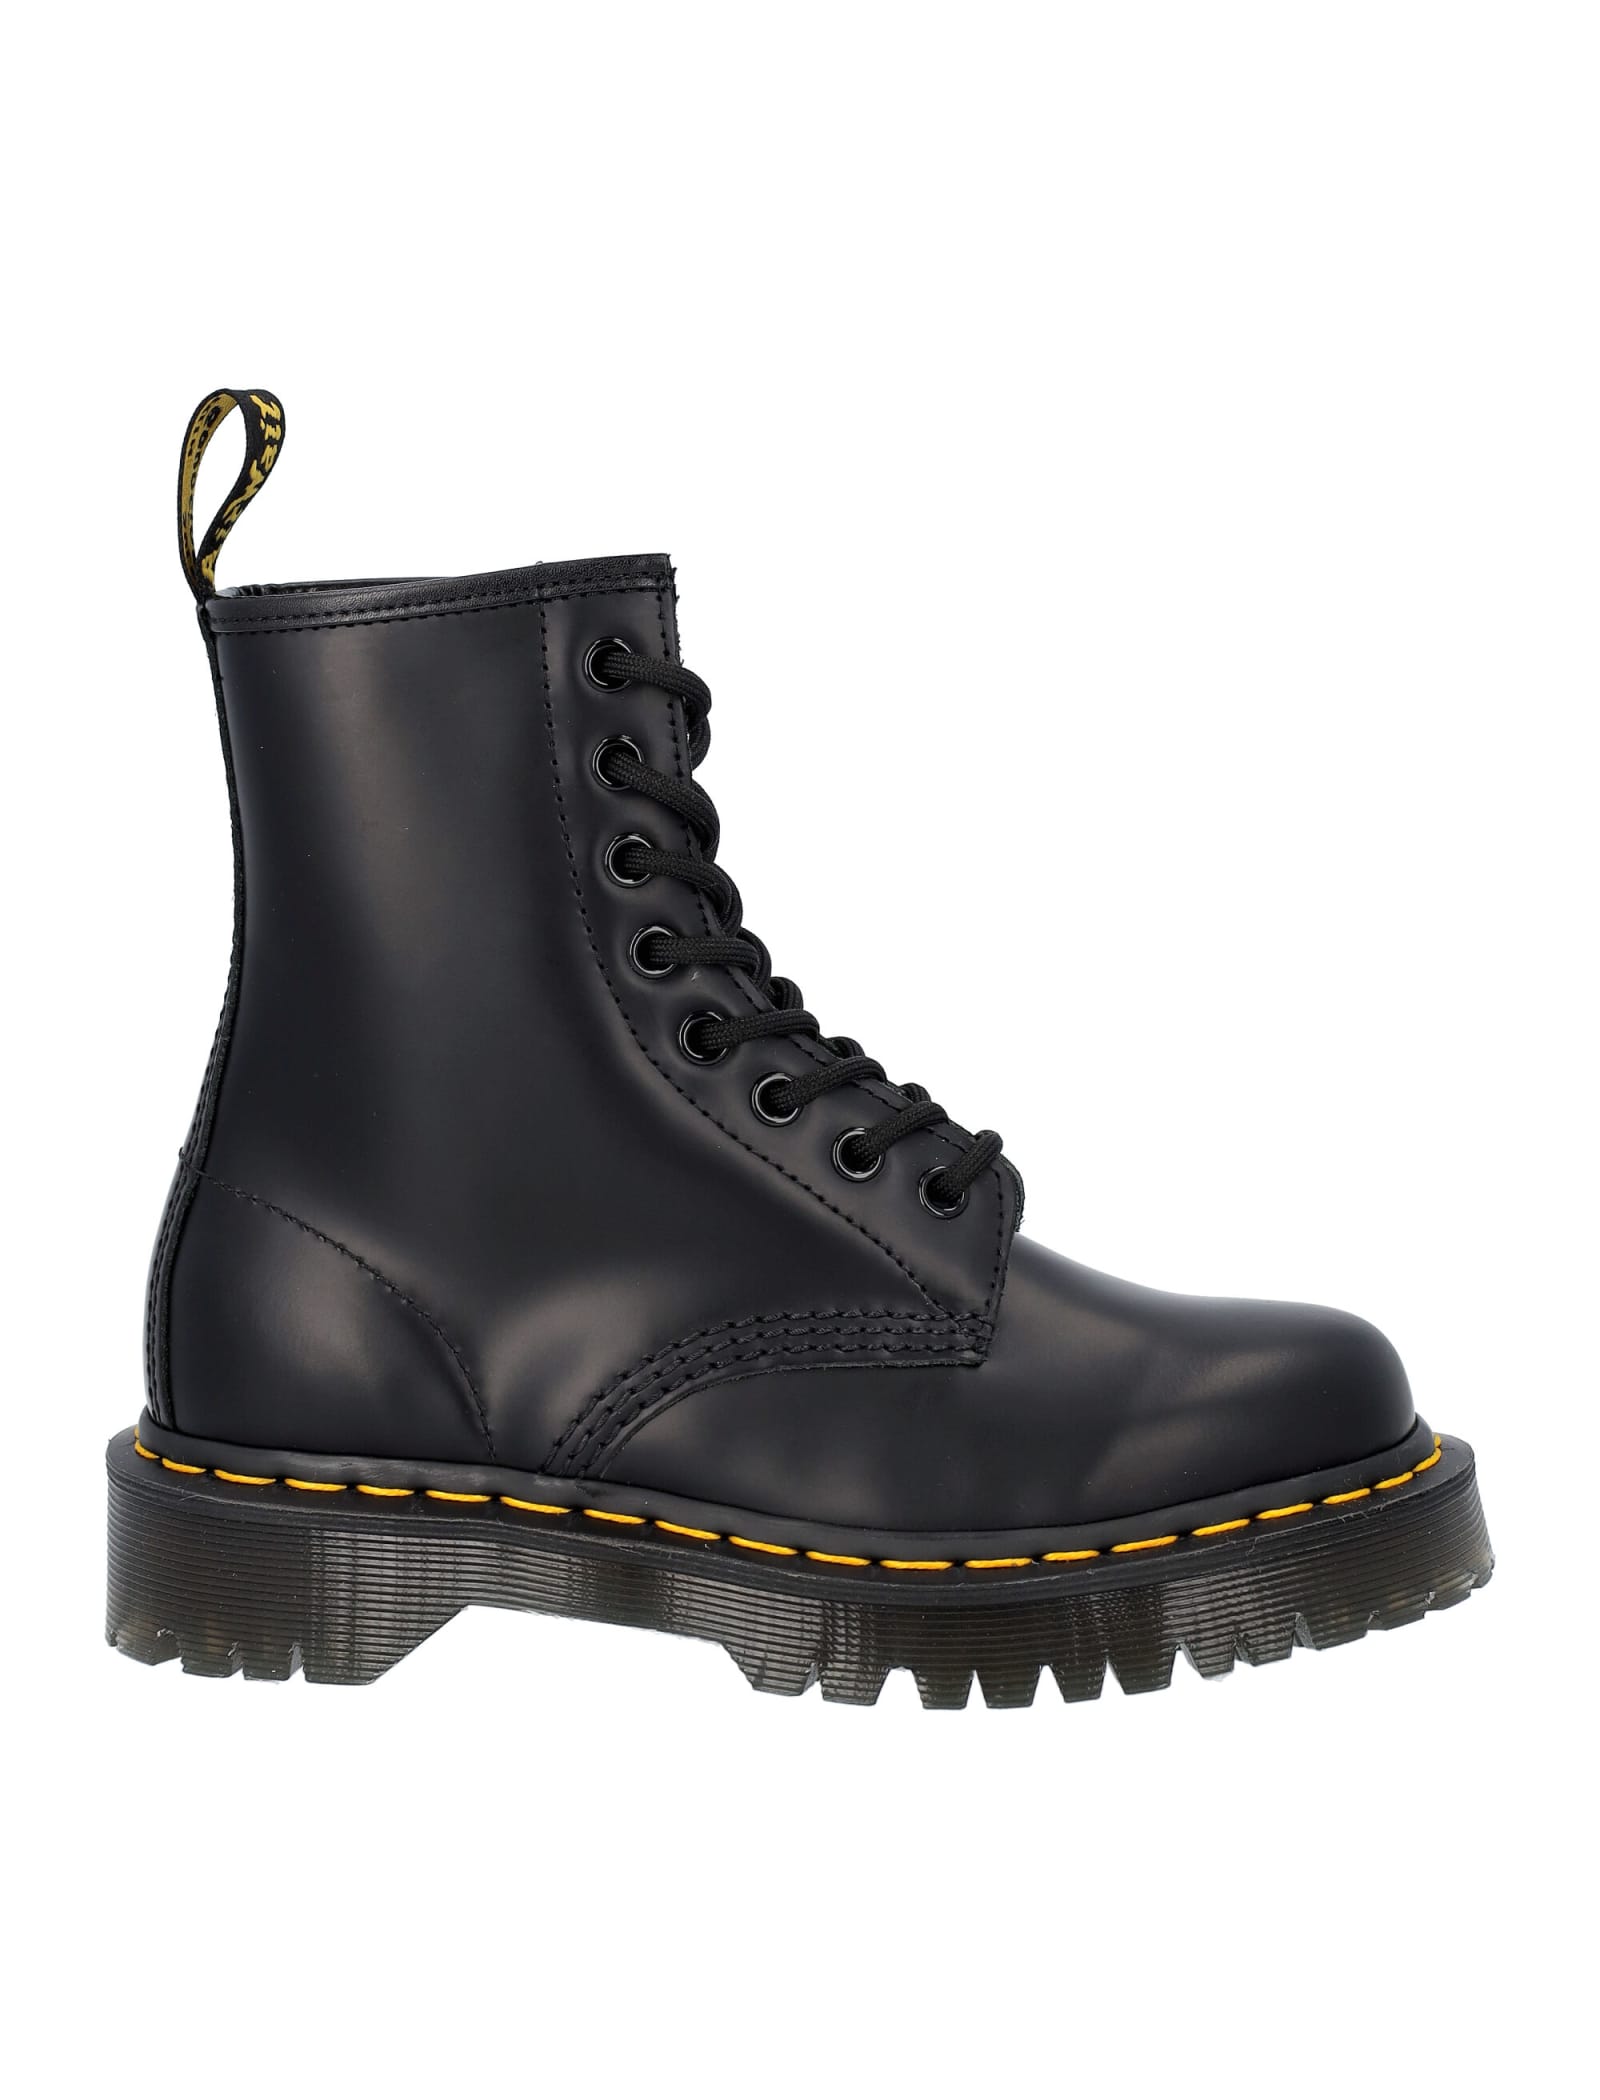 Dr. Martens Dr Martens 1460 Bex Smooth Leather Boots